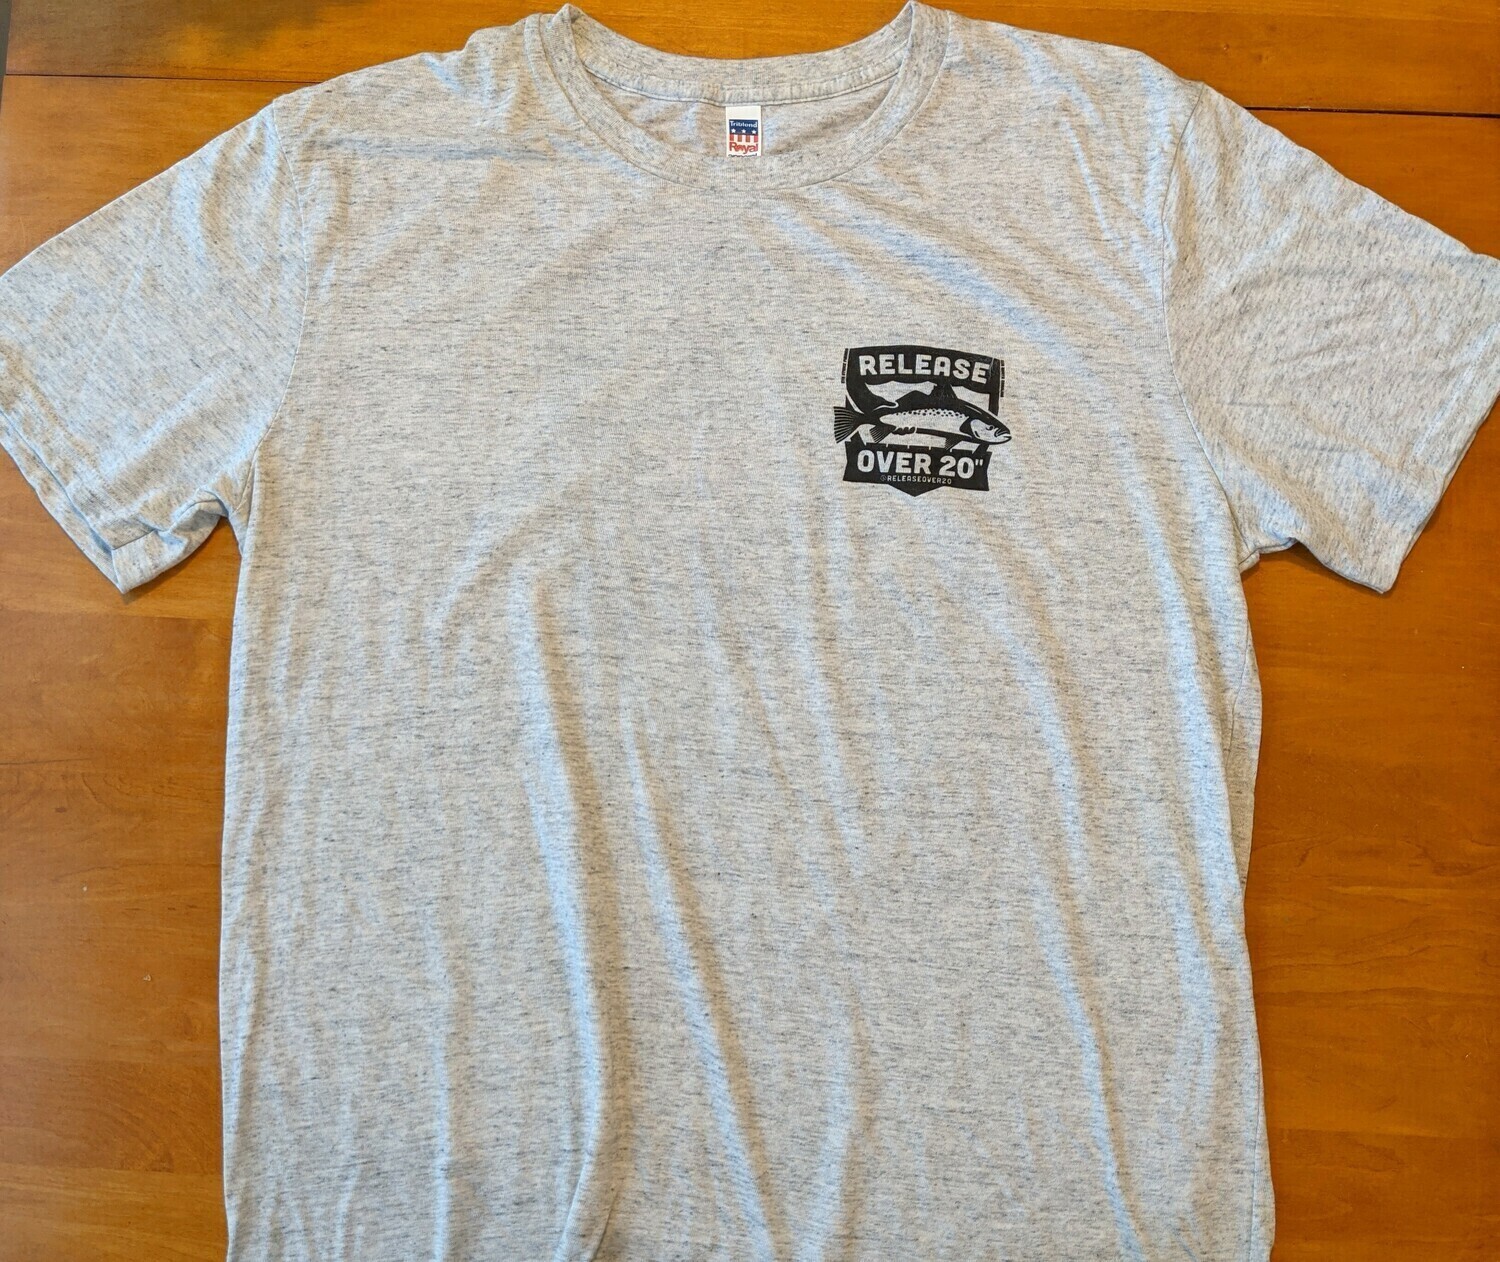 Release Over 20 Tri-Blend Tee - Size XL